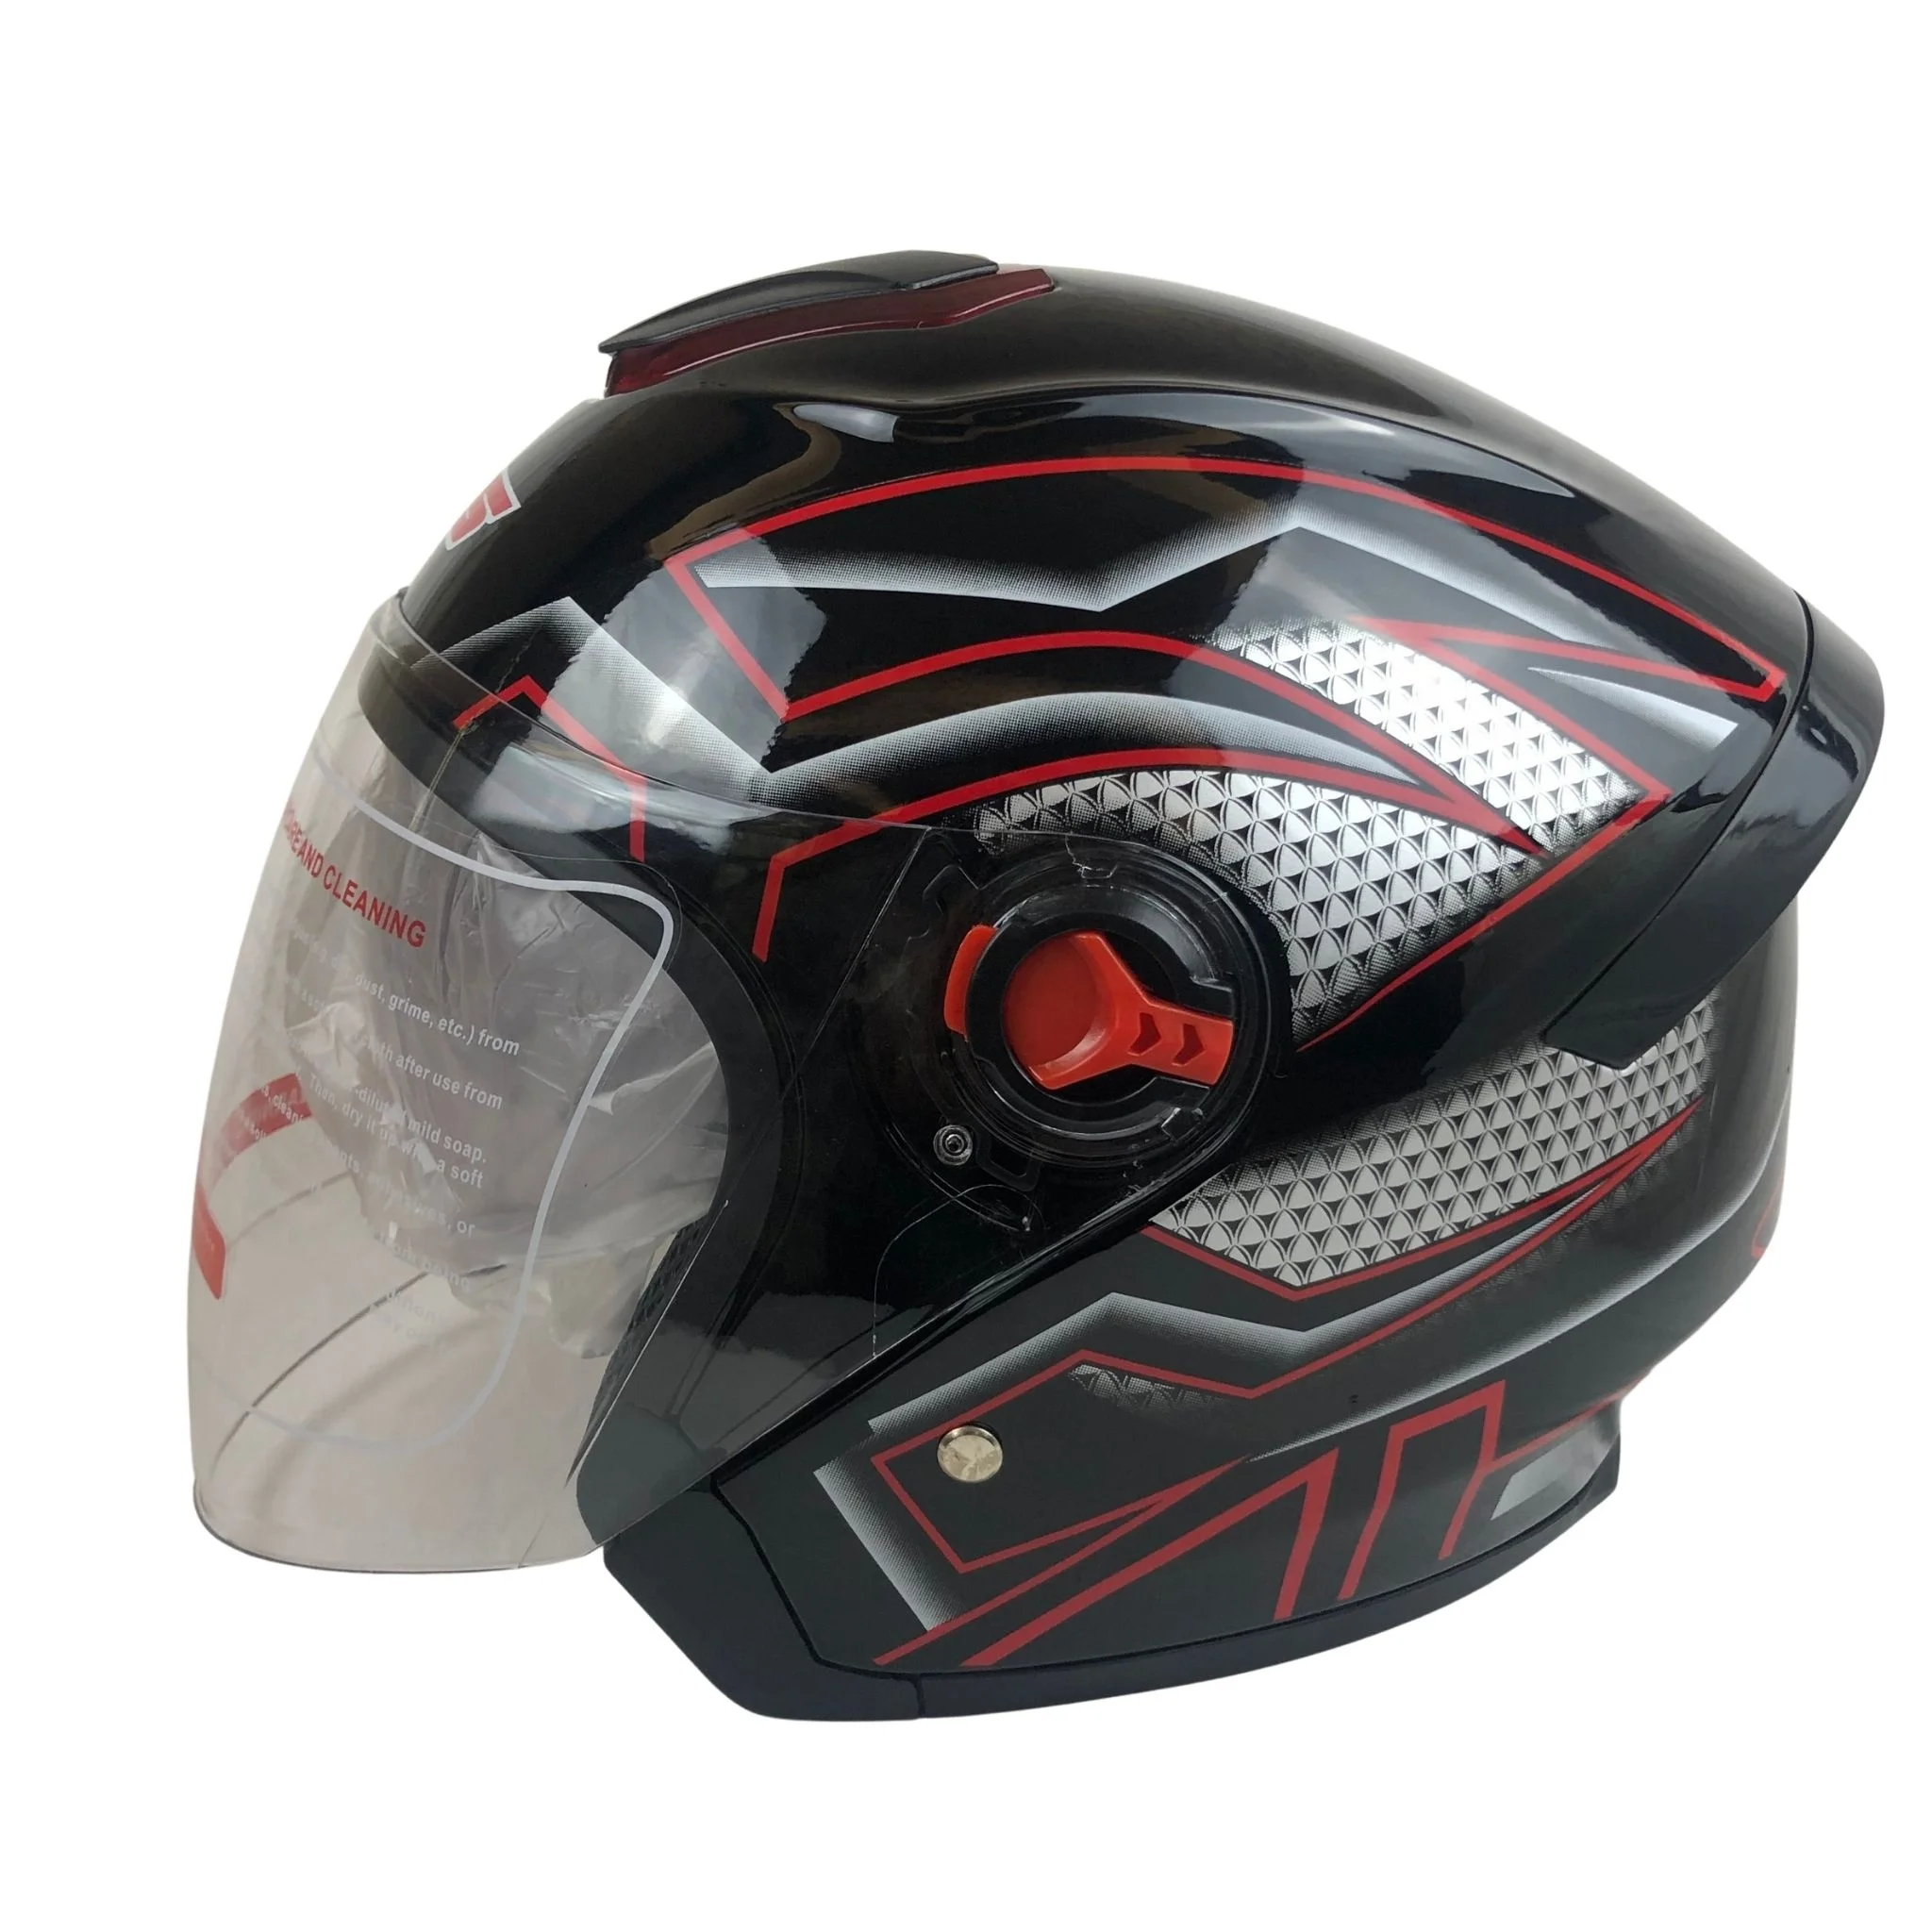 span Twinkelen Telemacos Motorcycle Half Helmets For Sale With Double Sun Visor For Women And Men  Electric Scooters Helmets - Buy Motorcycle Half Helmets For Sale,Electric Scooters  Helmets,Half Helmet Motorcycle Product on Alibaba.com